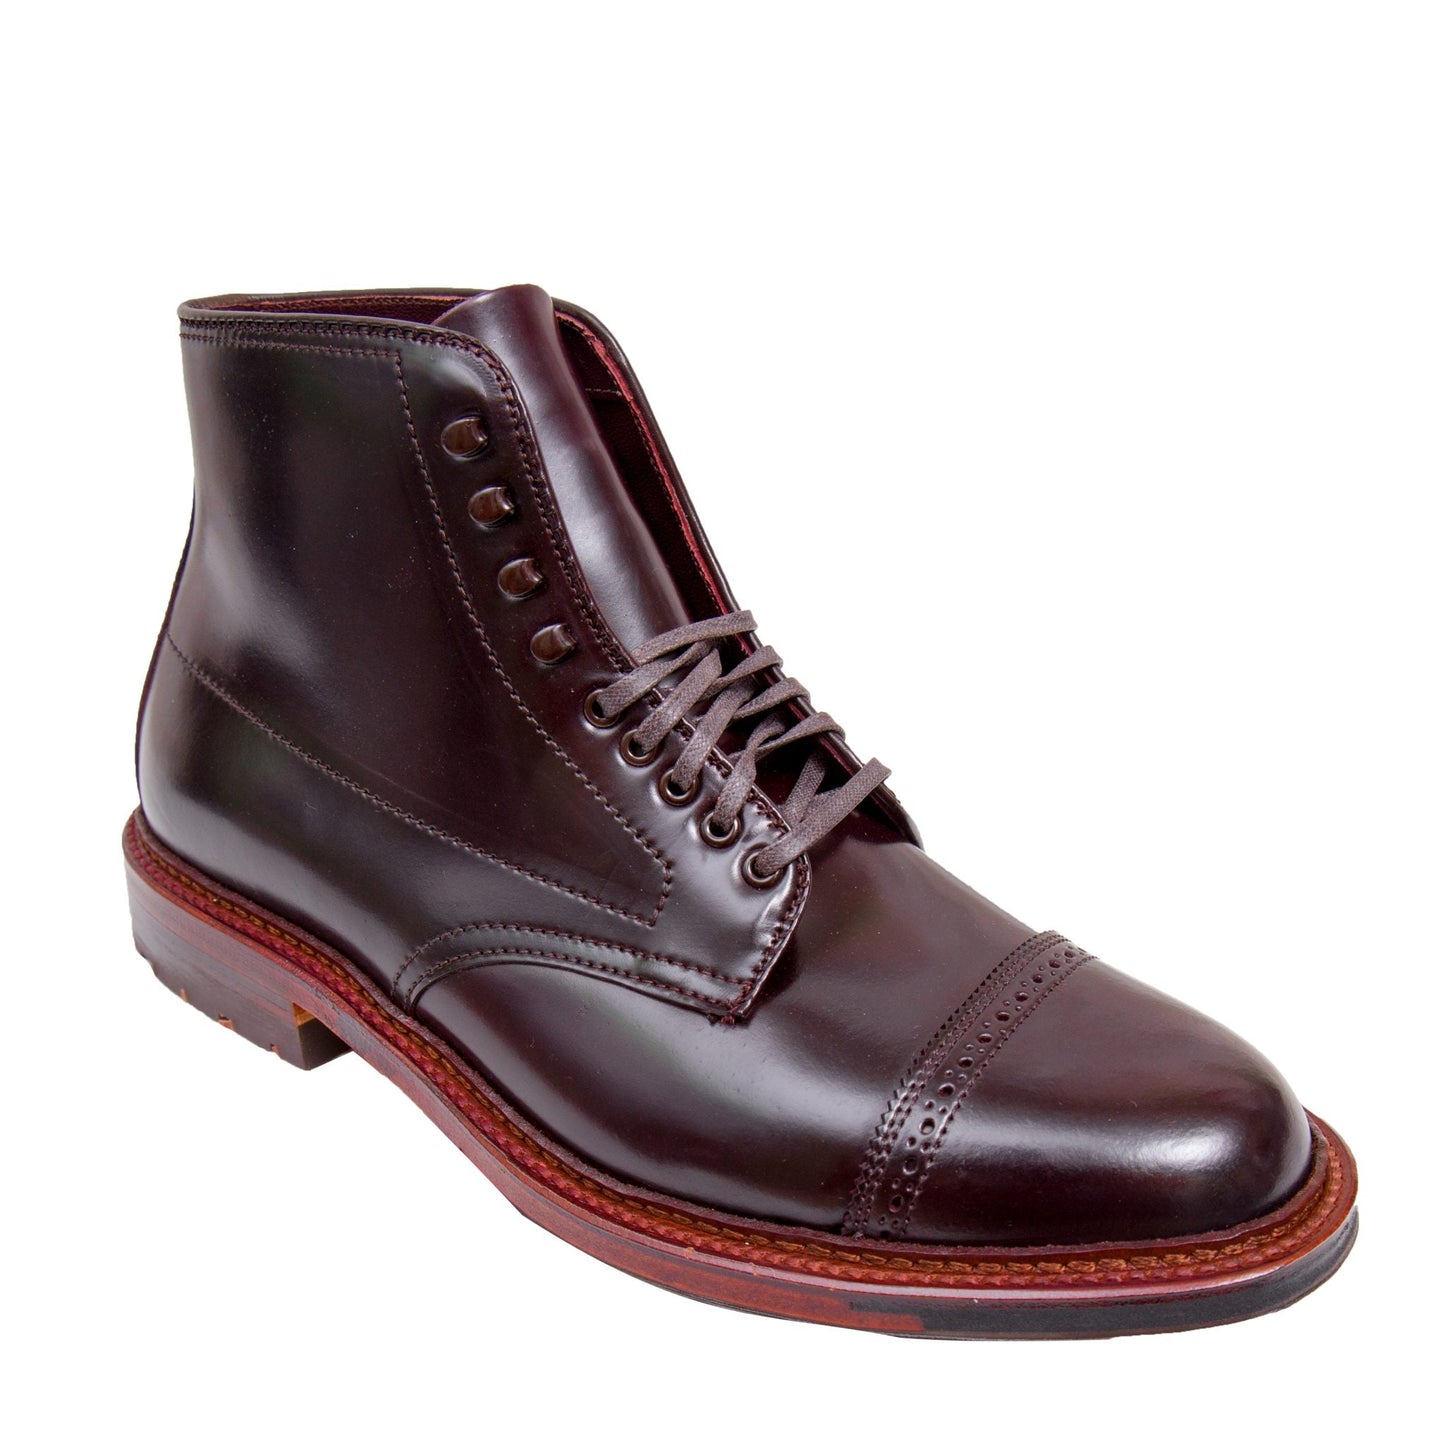 D6861HC - Jumper Boot in Color 8 Shell Cordovan